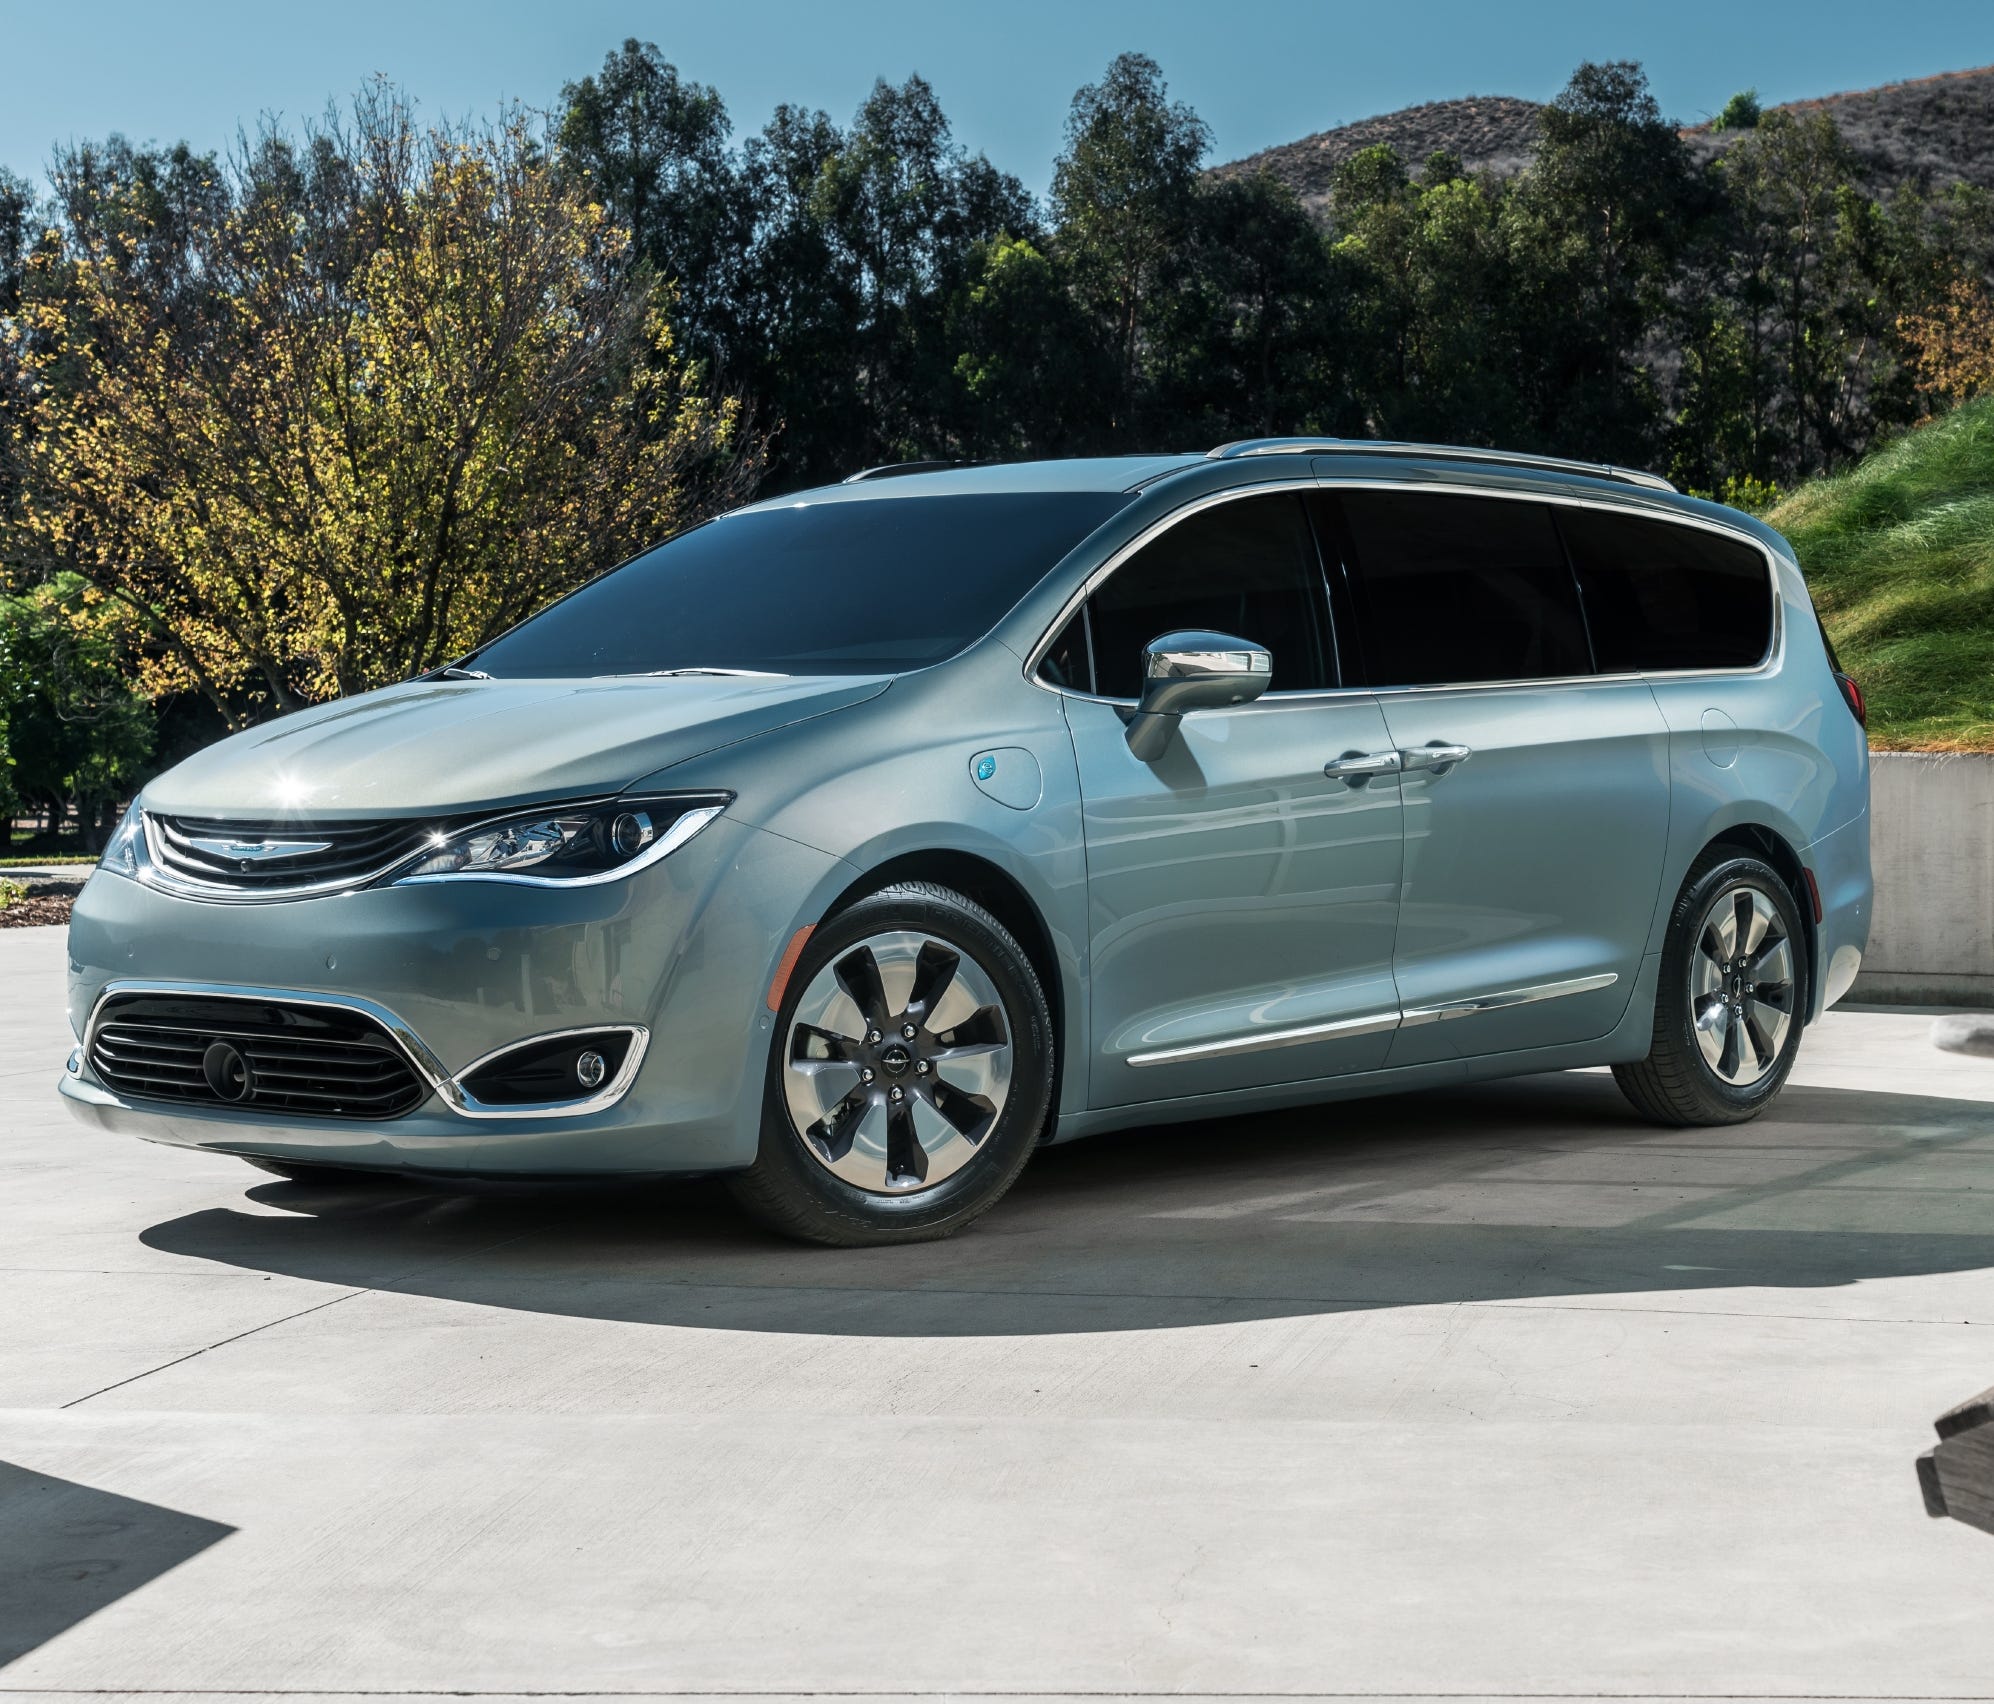 Chrysler's Pacifica Hybrid is finally going to be delivered to customers